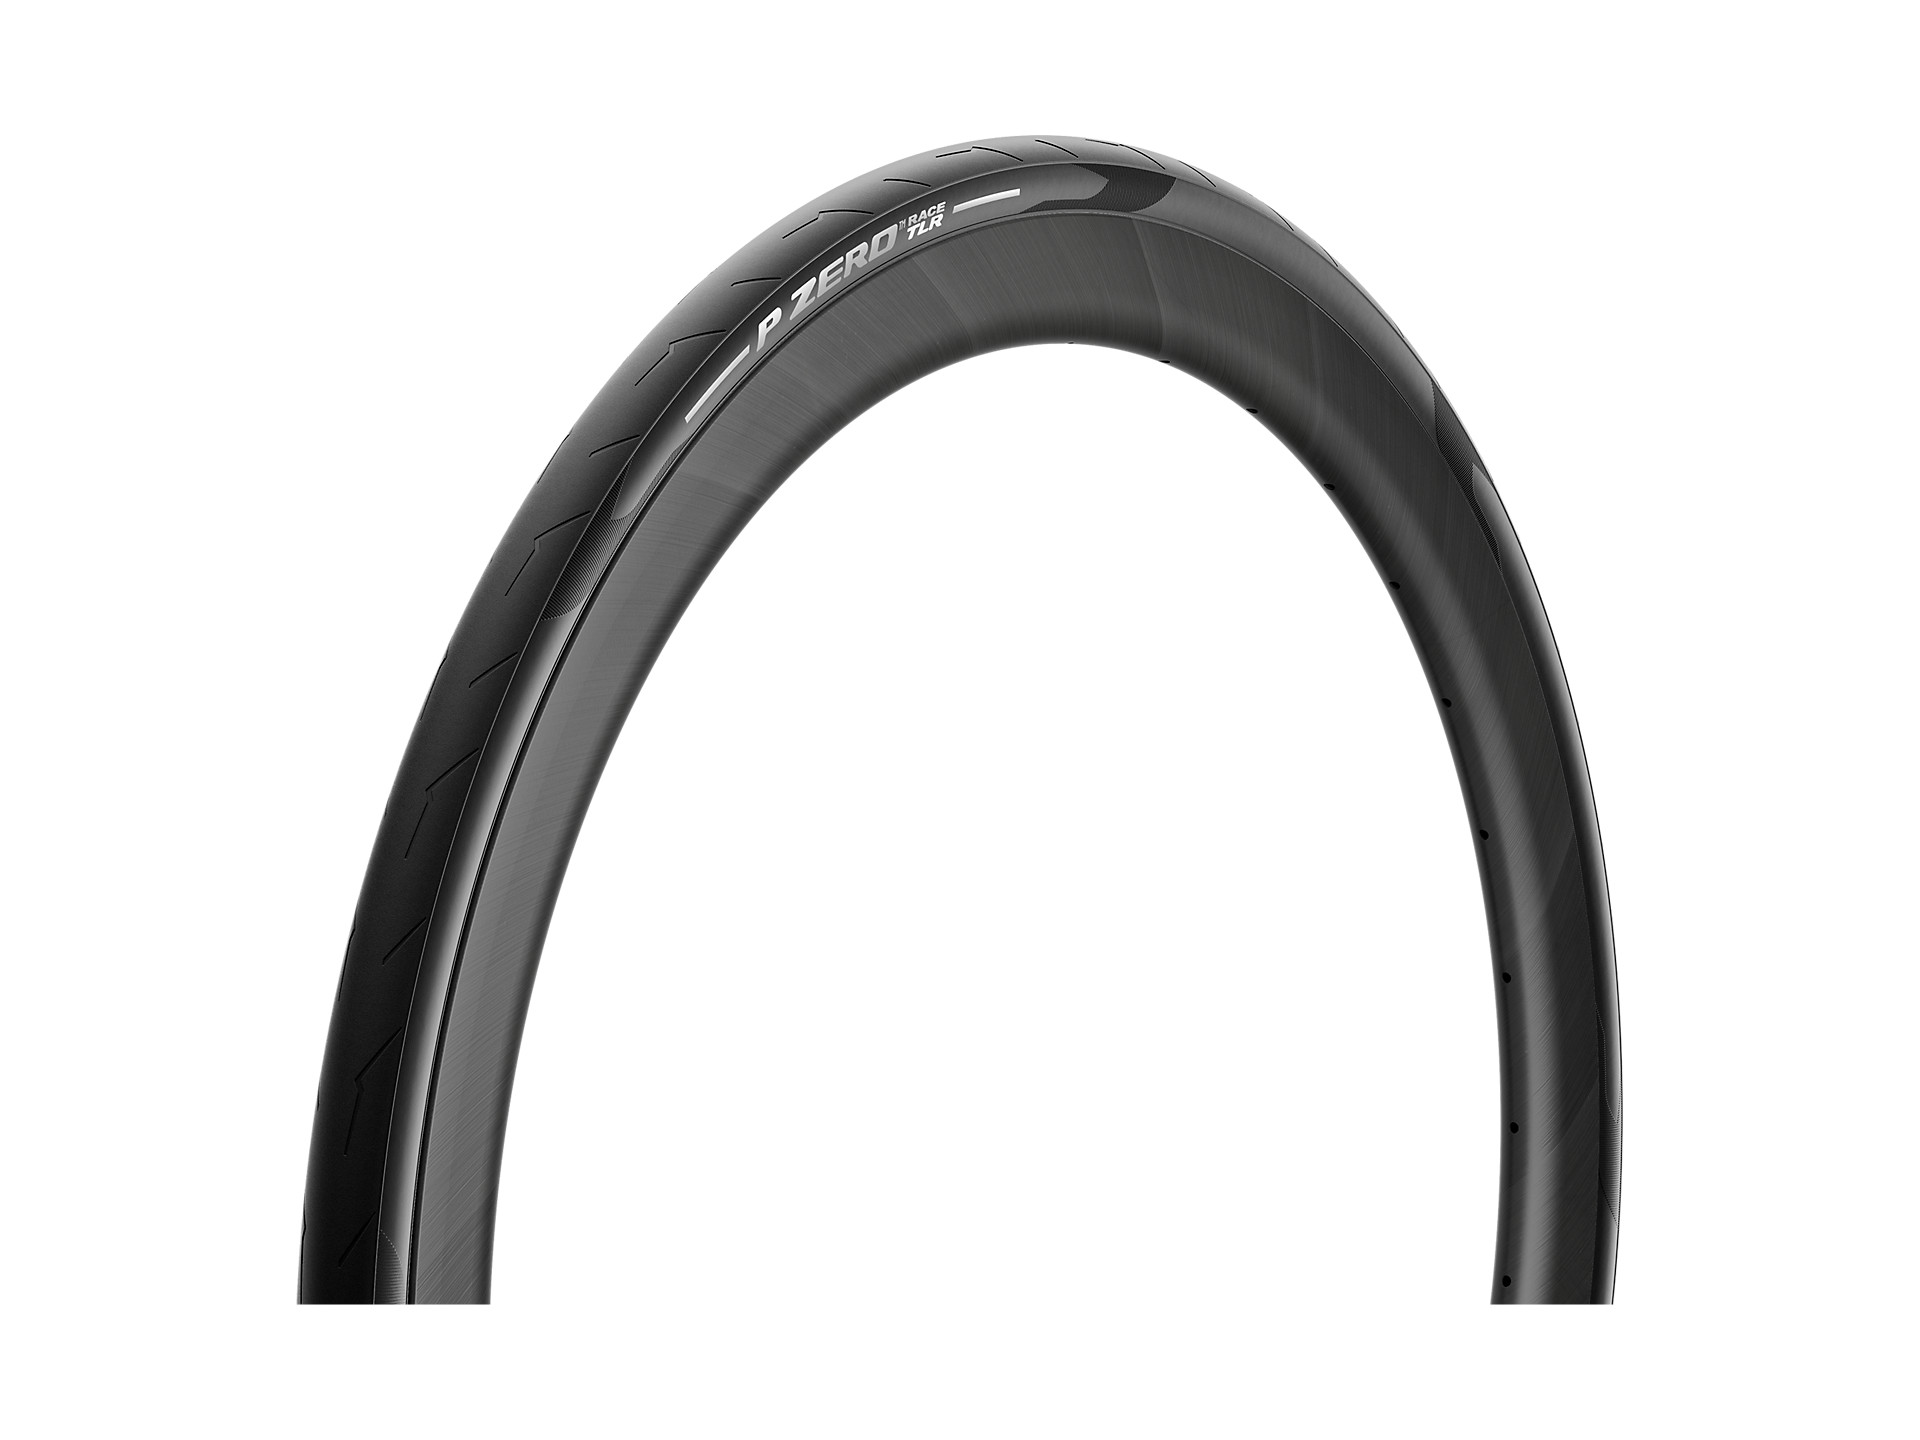 <a href="https://cycles-clement.be/product/pneu-p-zero-race-tlr-700x26c-pirelli/">PNEU P ZERO RACE TLR 700X26C PIRELLI</a>